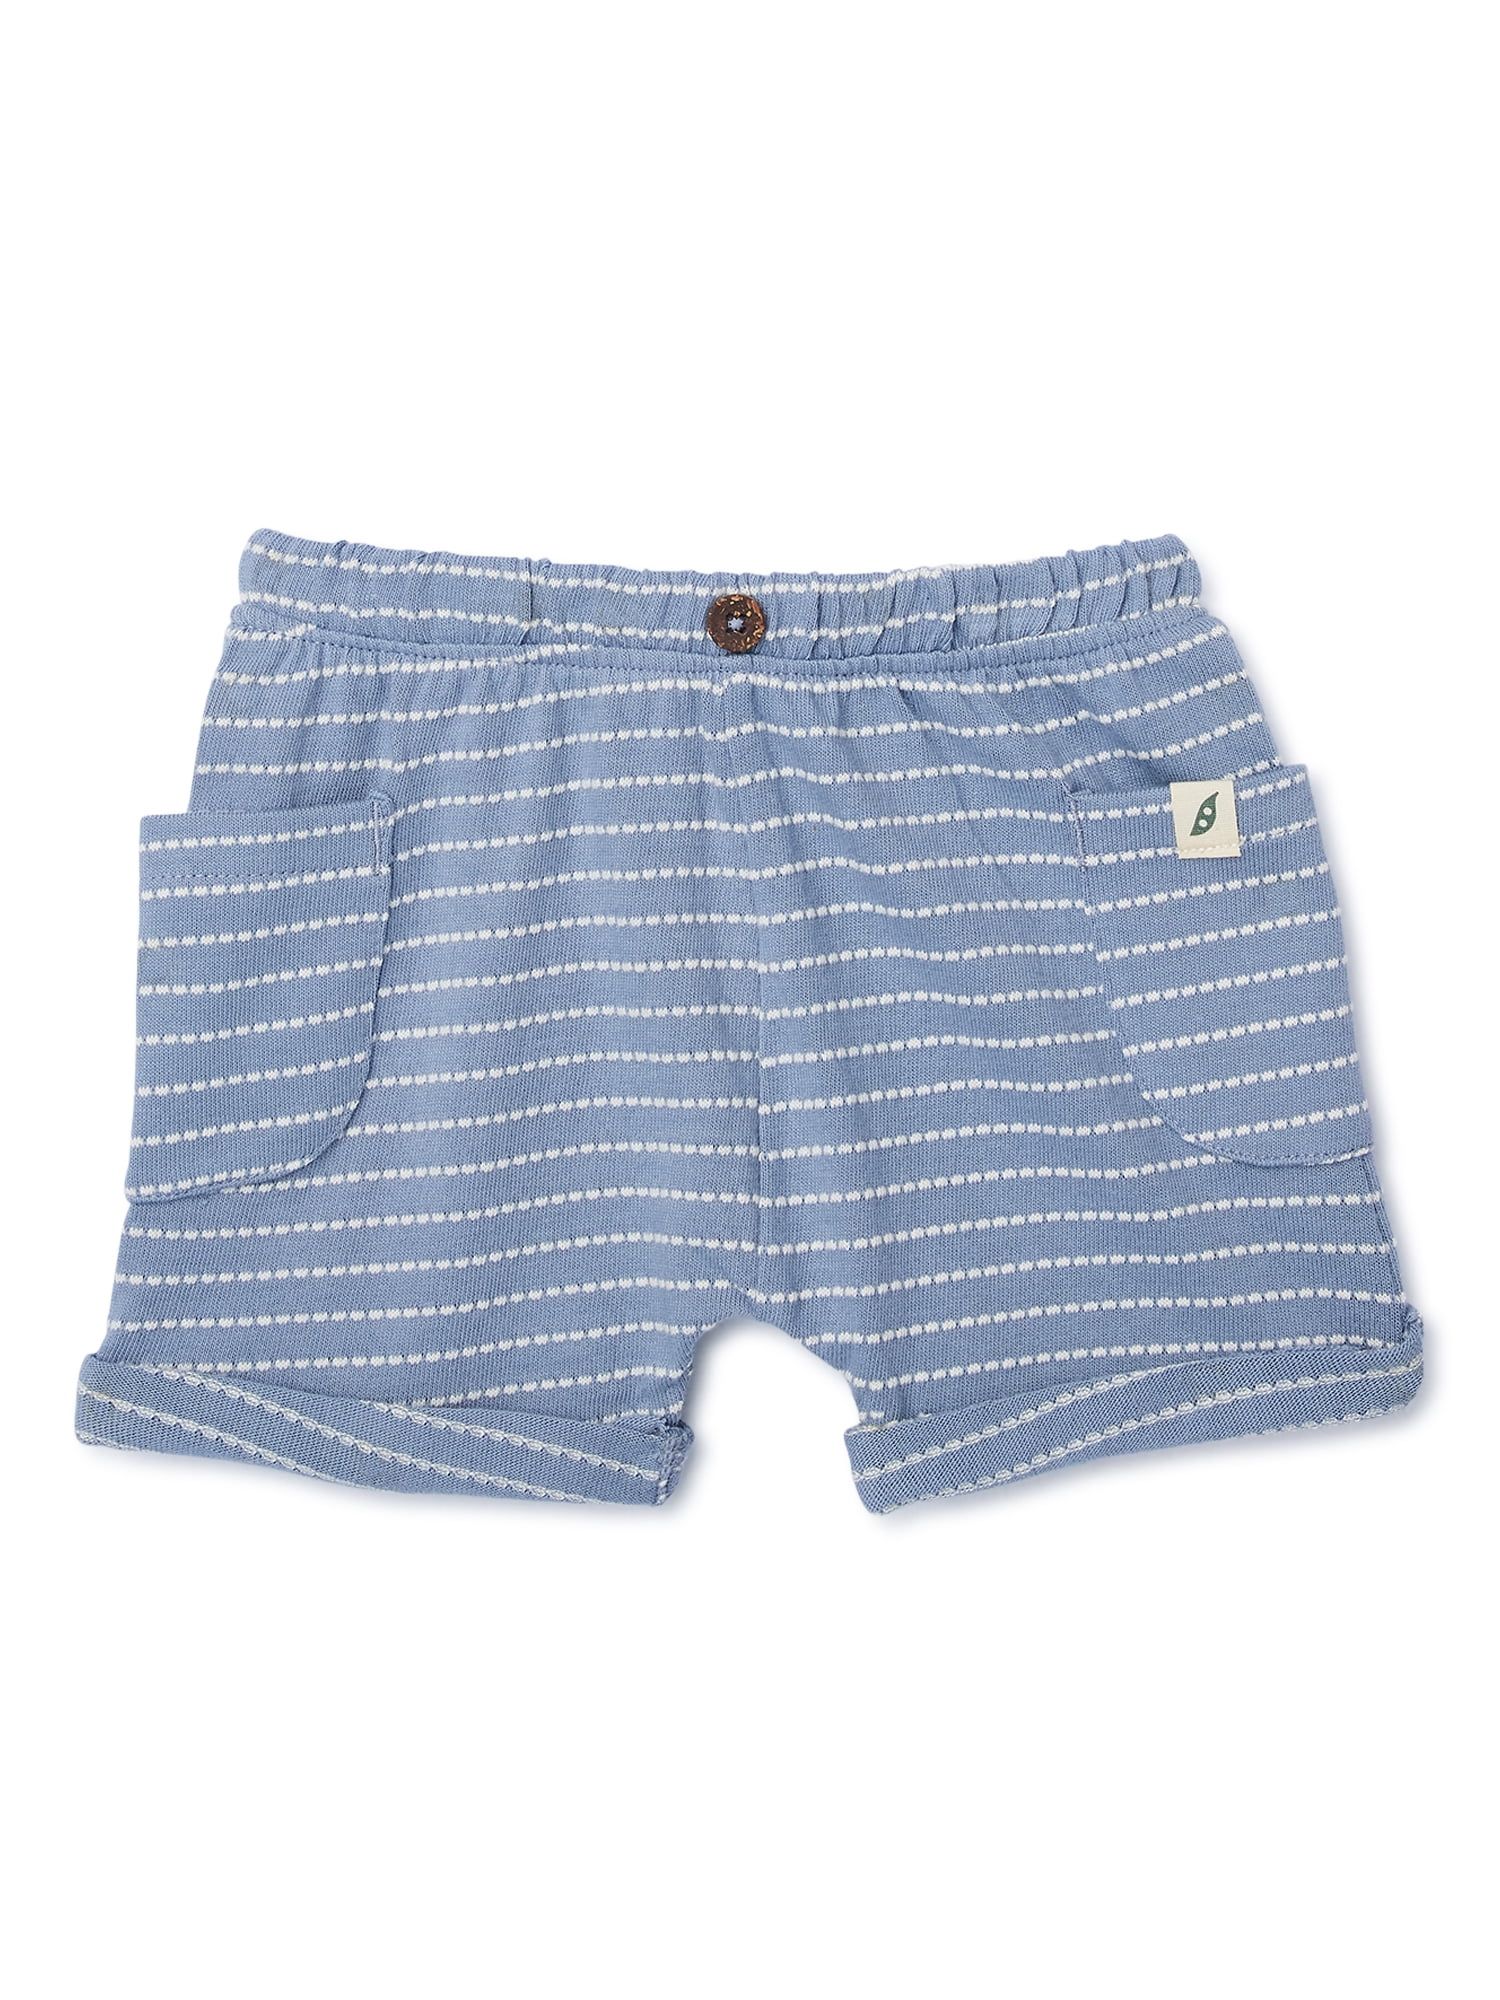 easy-peasy Baby Striped Knit Shorts, Sizes 0-24 Months | Walmart (US)